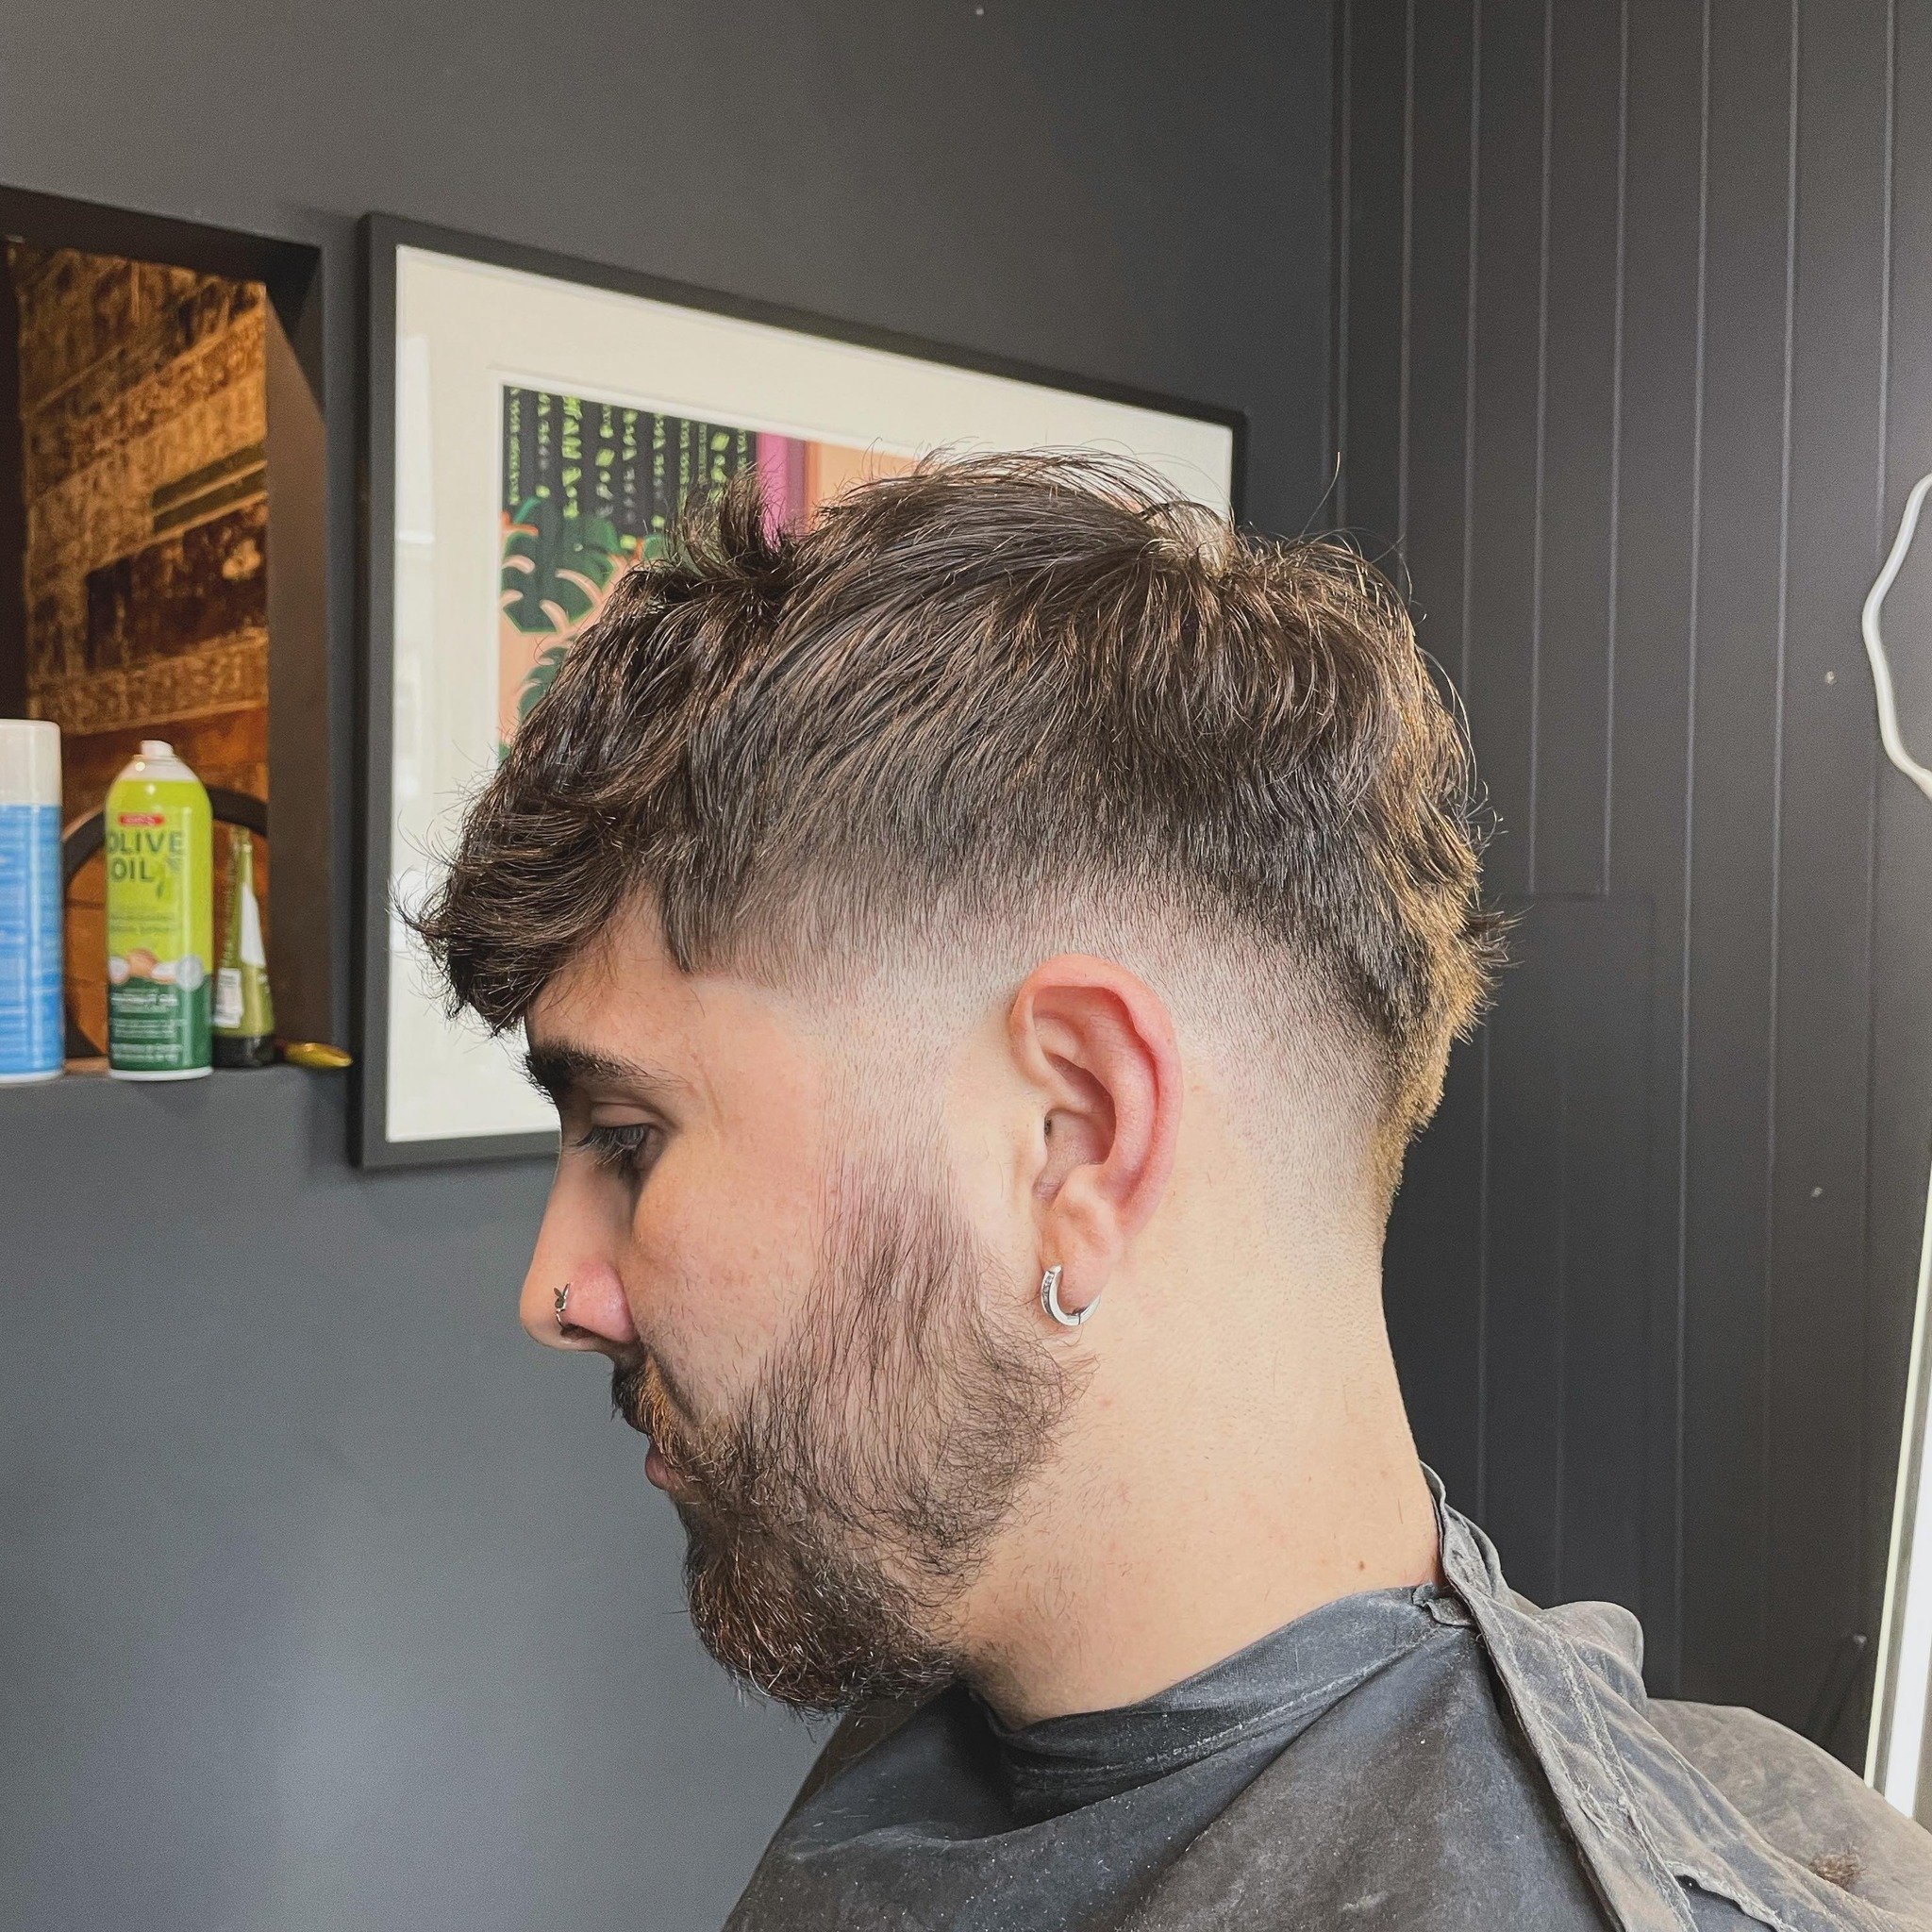 Approach everyday of the week like it&rsquo;s a Monday.
&bull;
&bull;
&bull;
&bull;
#haircut #fade #faded #menshaircut #menshairstyles #barbershop #barbershopnearme #hairstylist #sfbarber #sfbarbershop #sfart #sfartist #downtownsf #powellstreet #polk